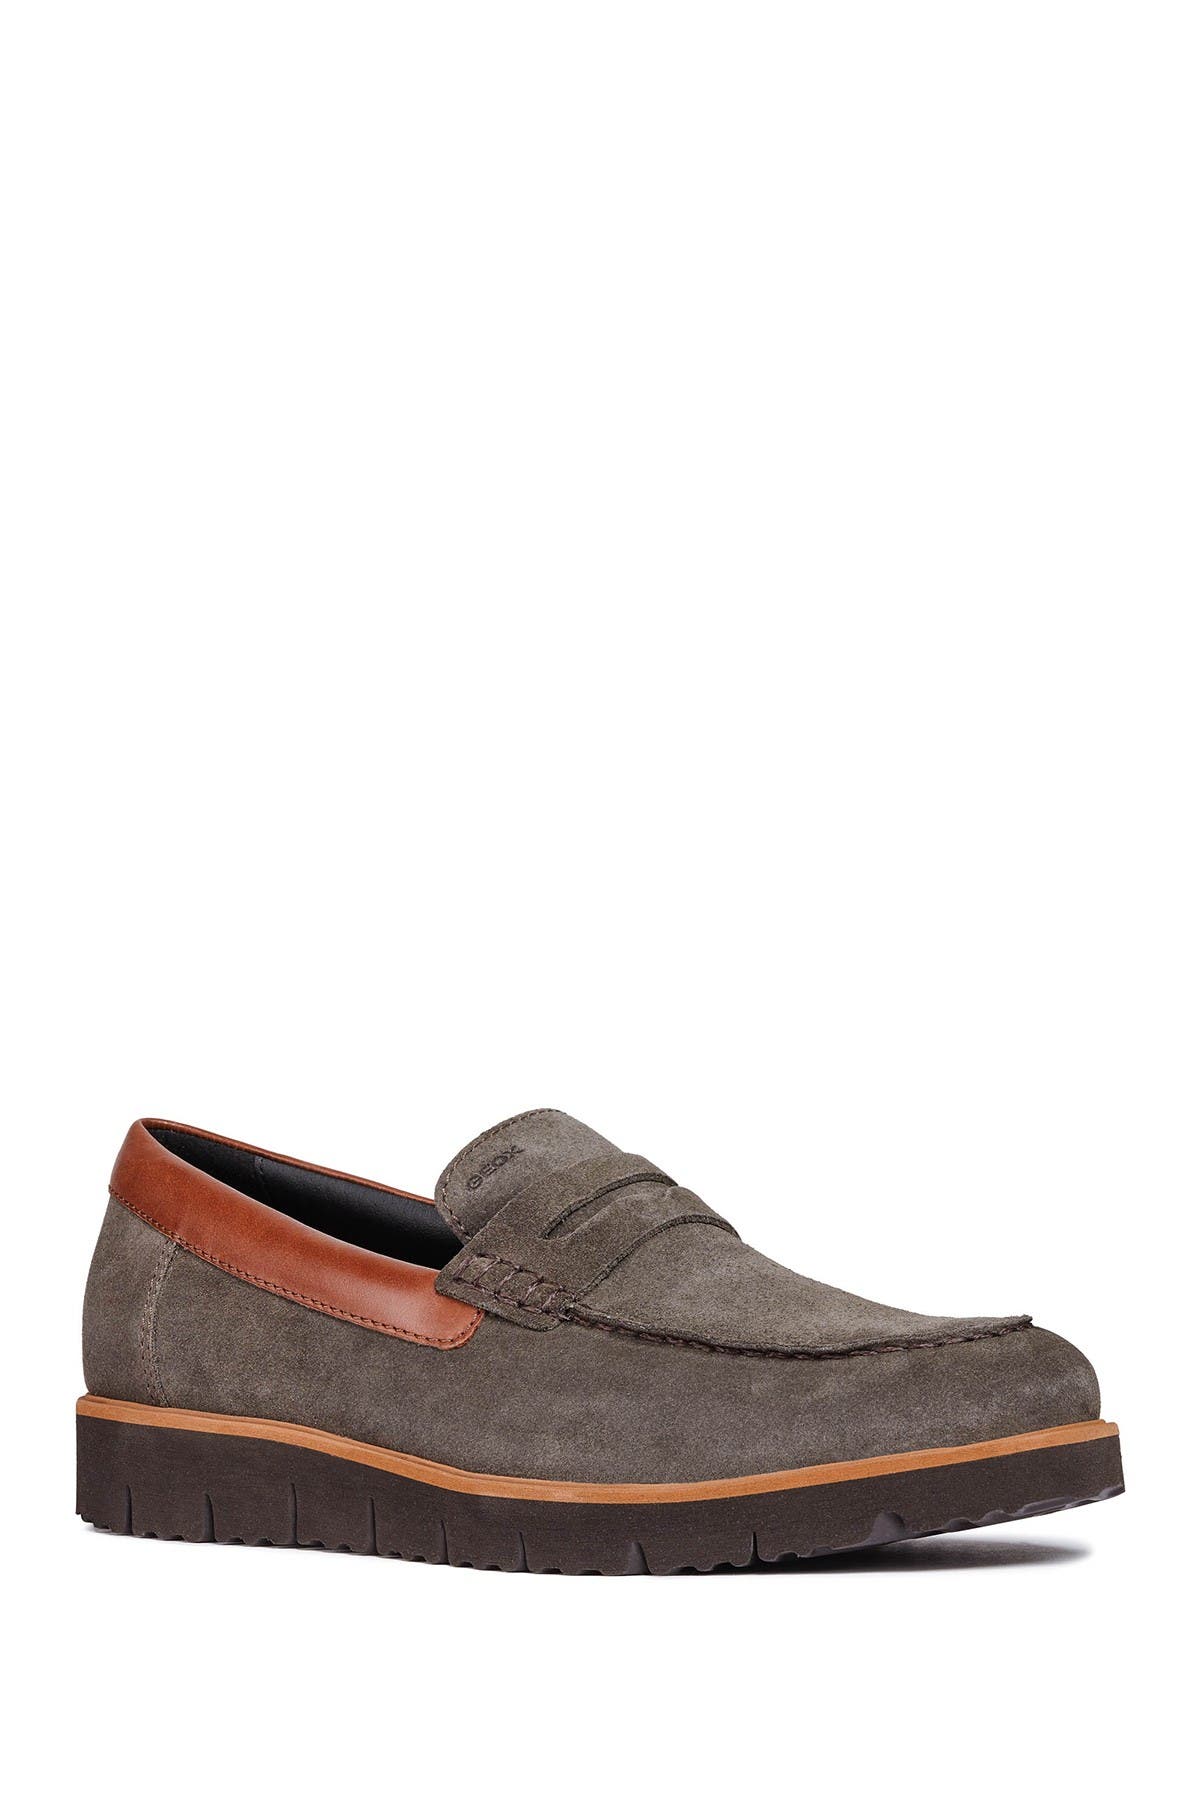 GEOX | Pluges 6 Suede Boat Shoe 